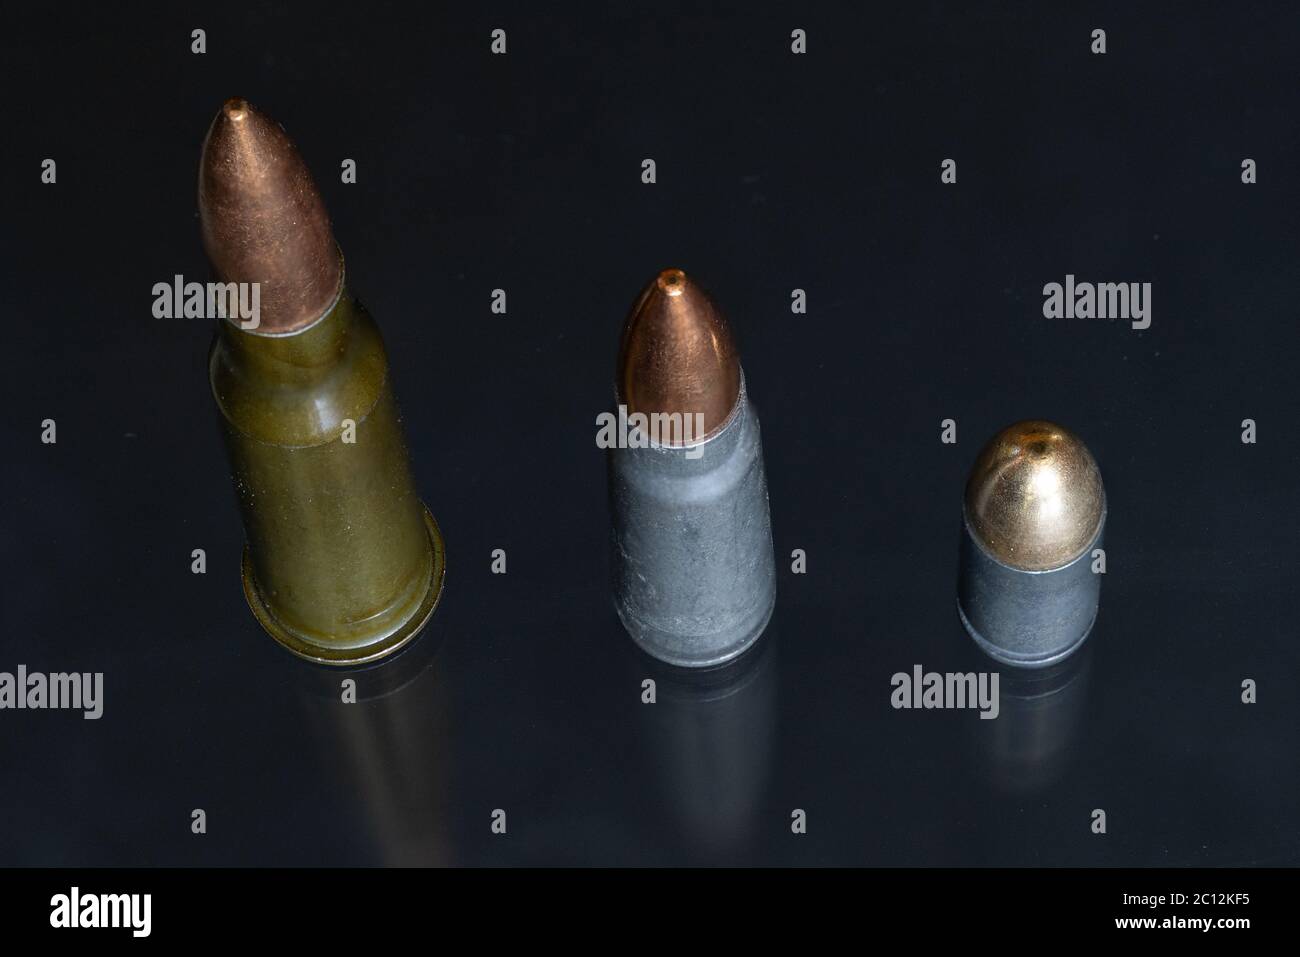 Left to Right: 7.62X54, 7.62X39, 9mm Stock Photo